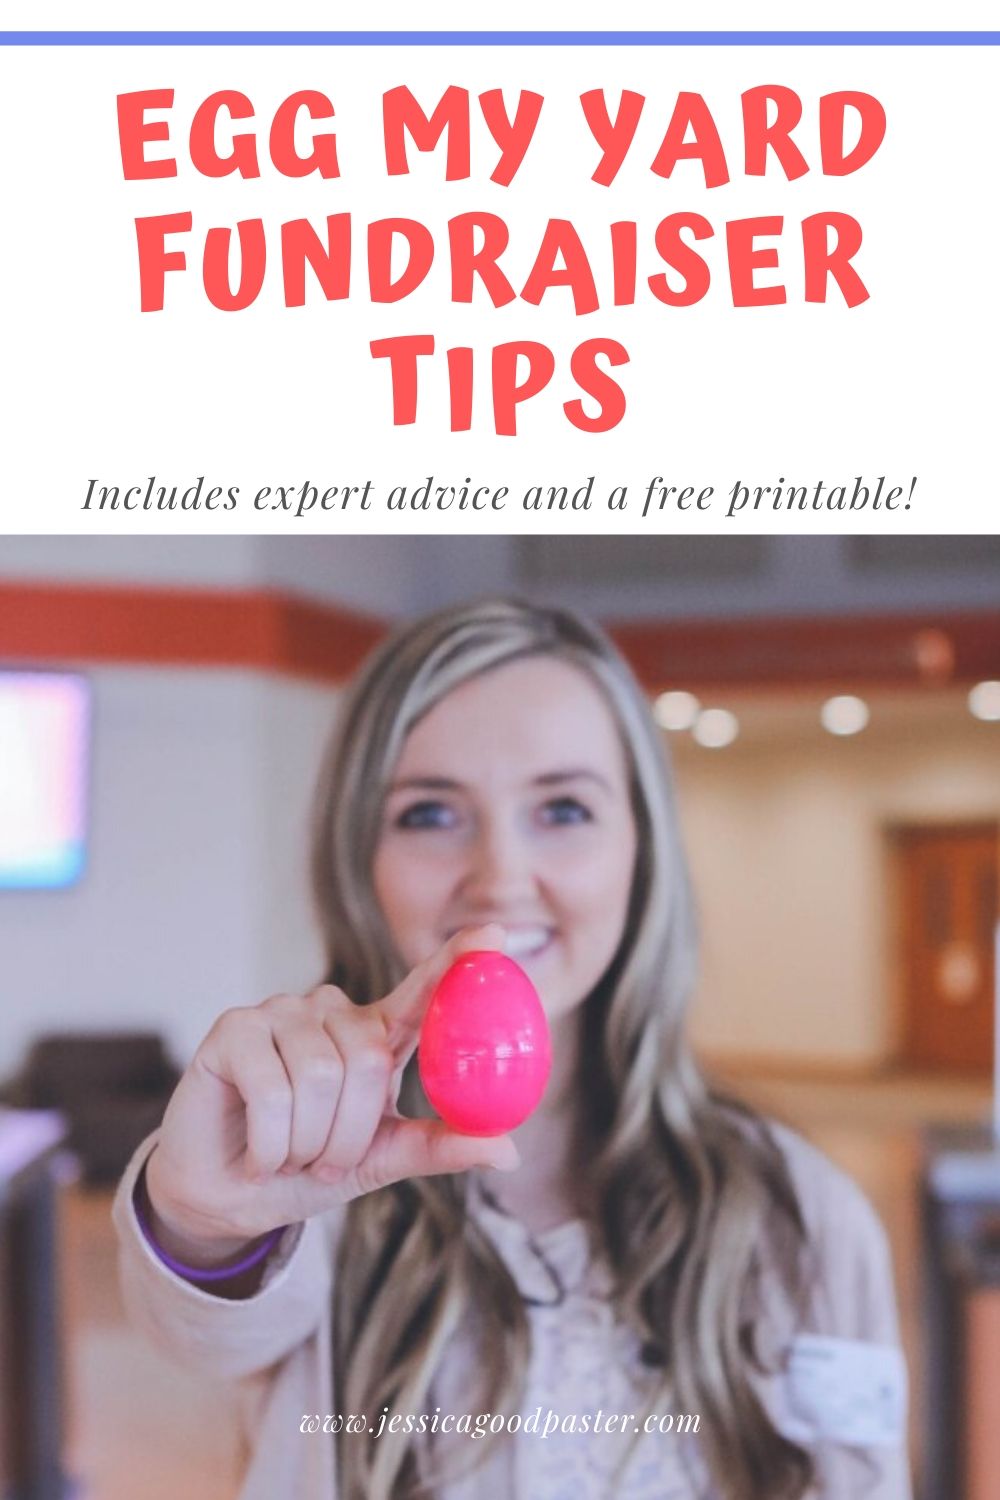 How to Run the Best Egg My Yard Adoption Fundraiser | Learn expert tips on how you can make money with this fun Easter fundraiser! Includes free printable Easter Bunny note and how to organize and advertise, flyer ideas, and ways to make your Egg Your Yard fundraiser a success! #fundraiser #adoption #adoptionfundraiser #easter